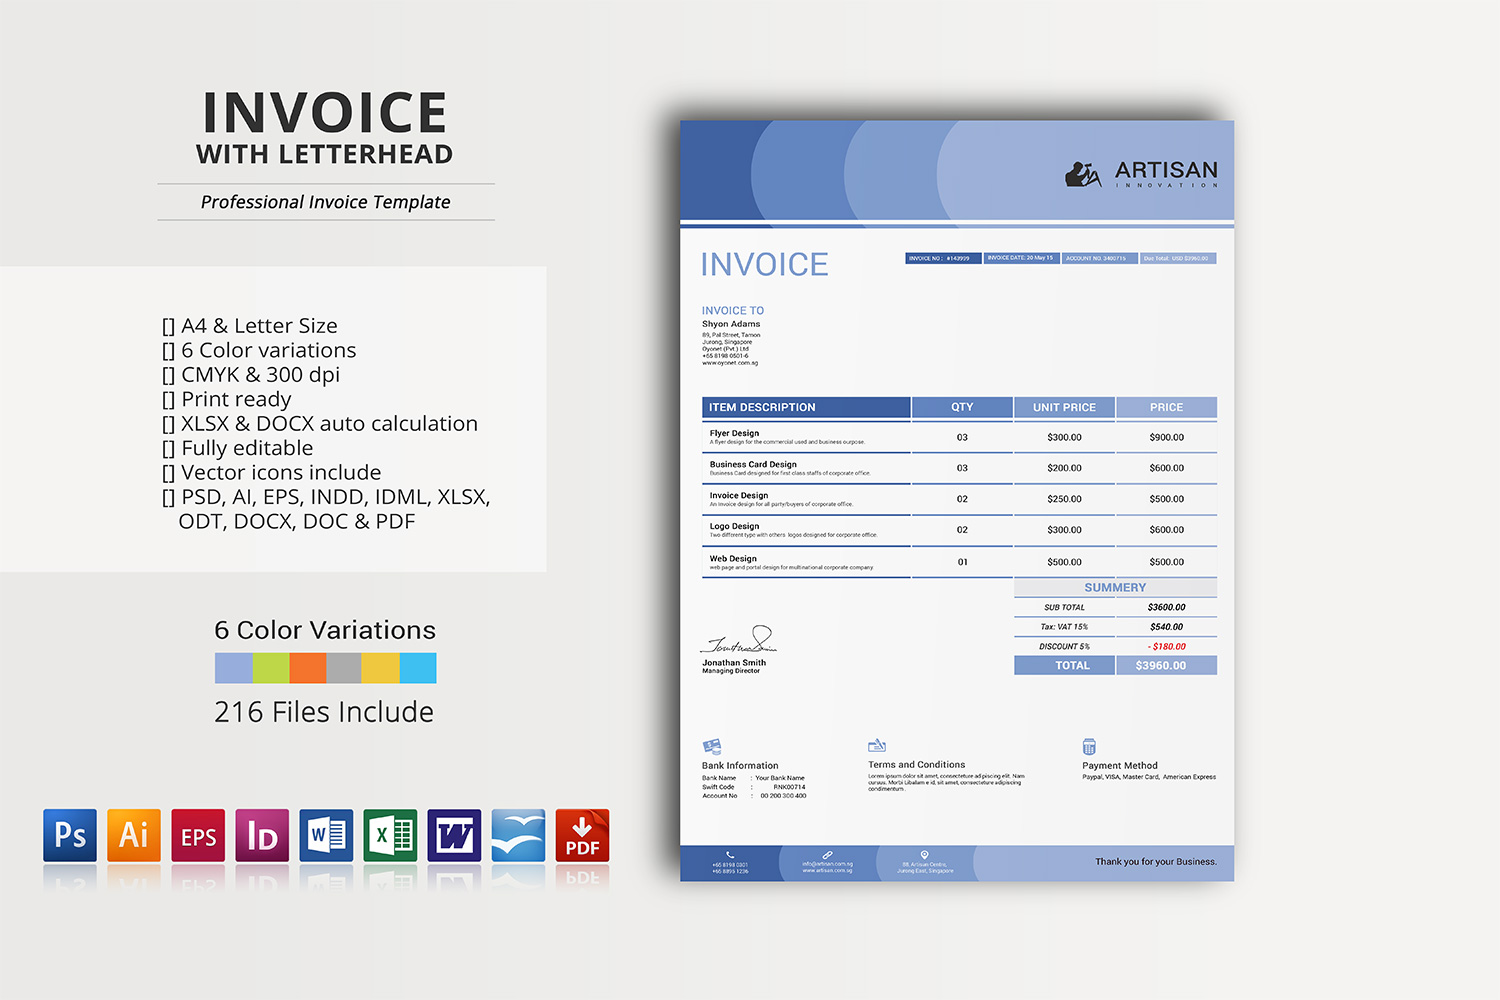 Invoice with Letterhead ~ Stationery Templates on Creative Market